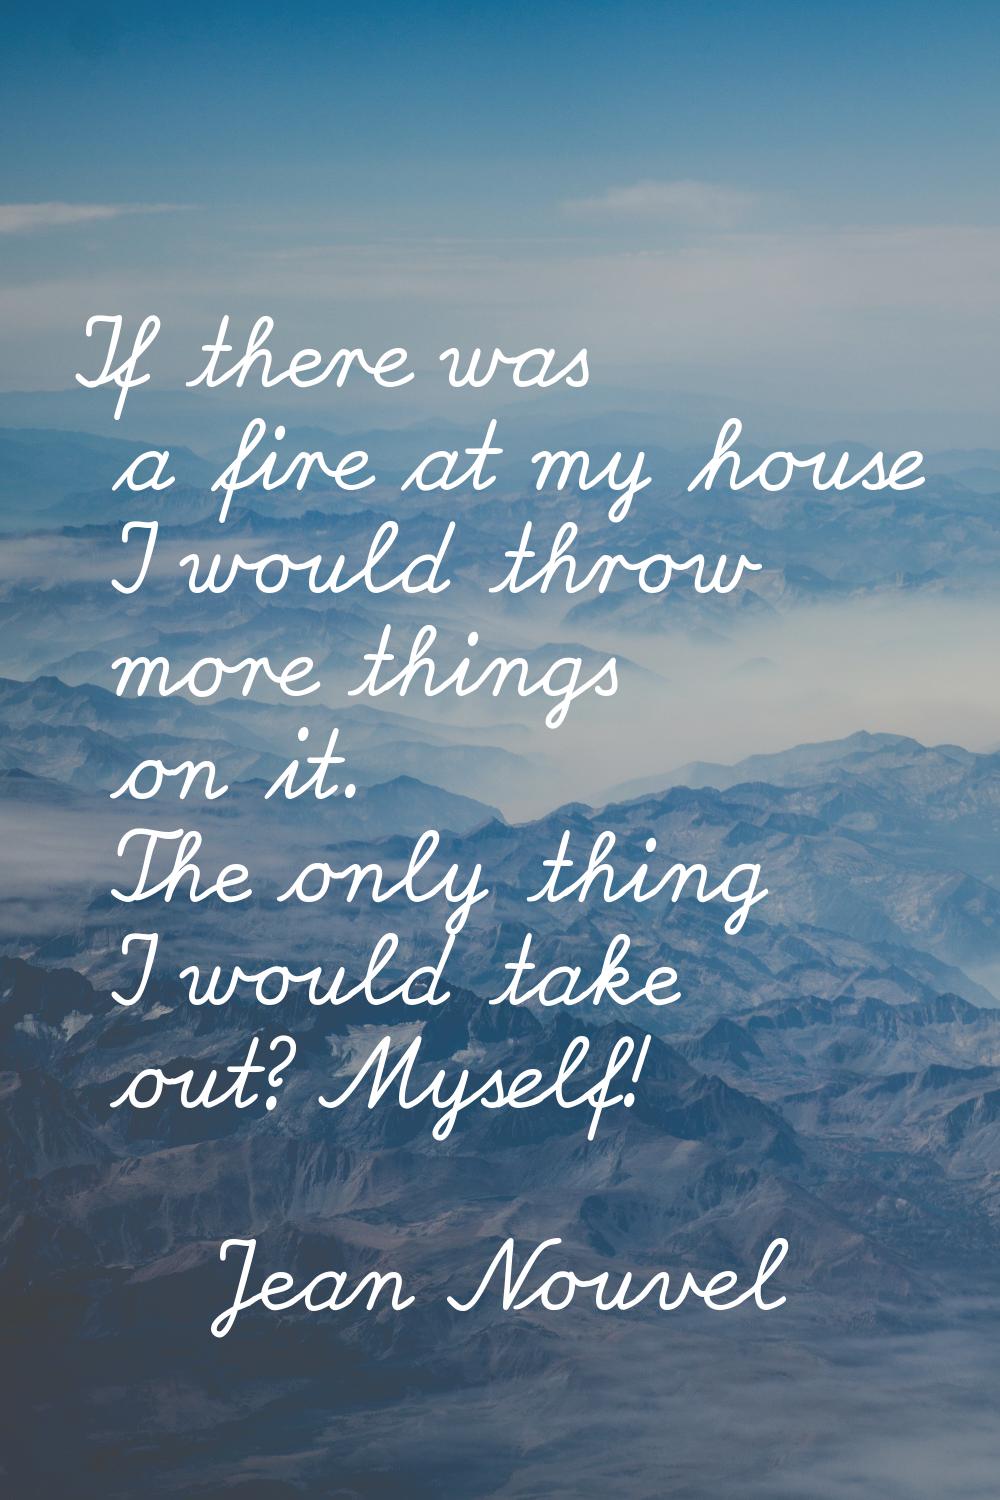 If there was a fire at my house I would throw more things on it. The only thing I would take out? M